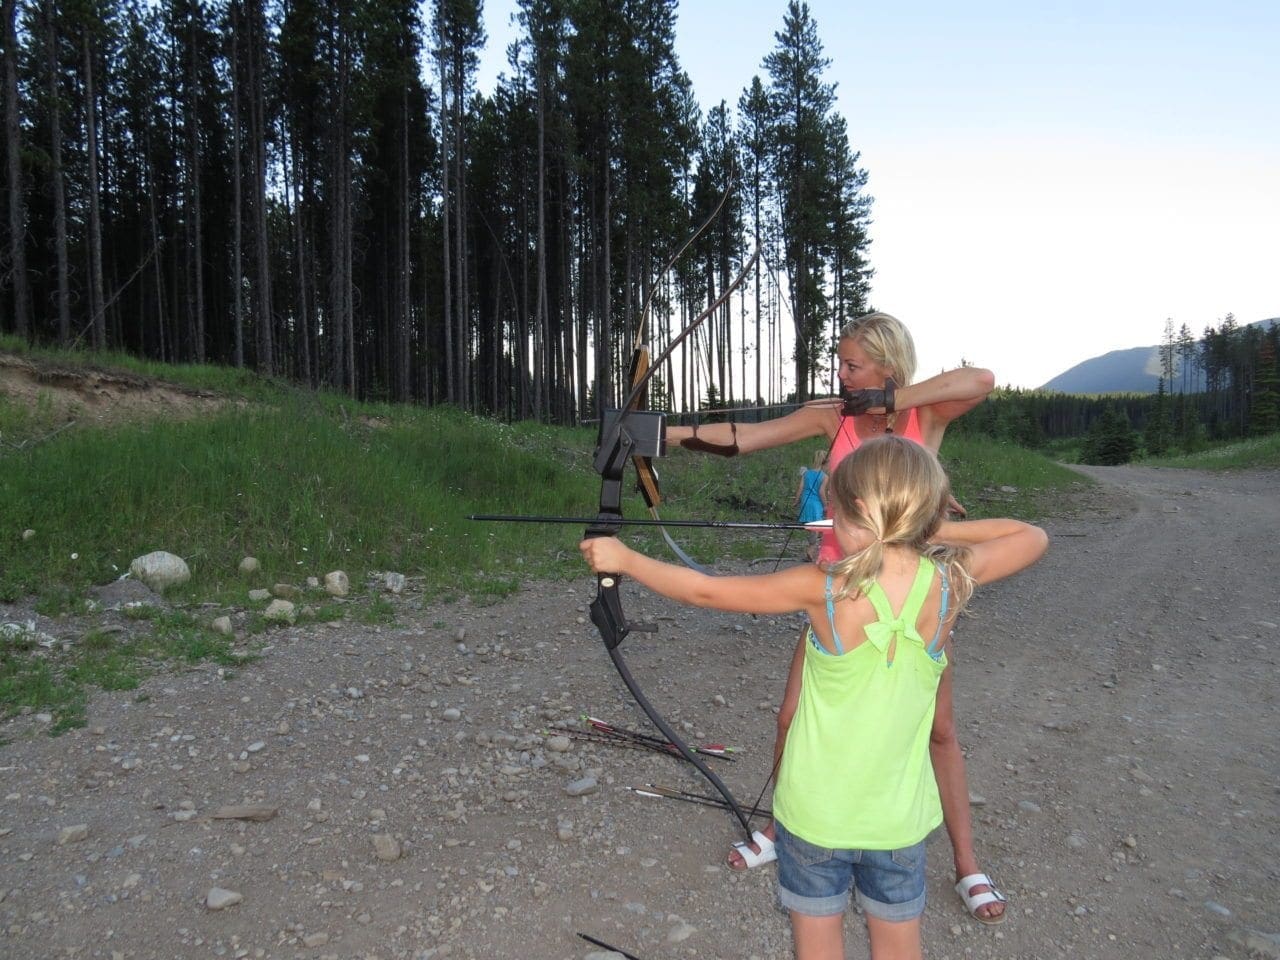 Erica and Carmyn practicing with recurves